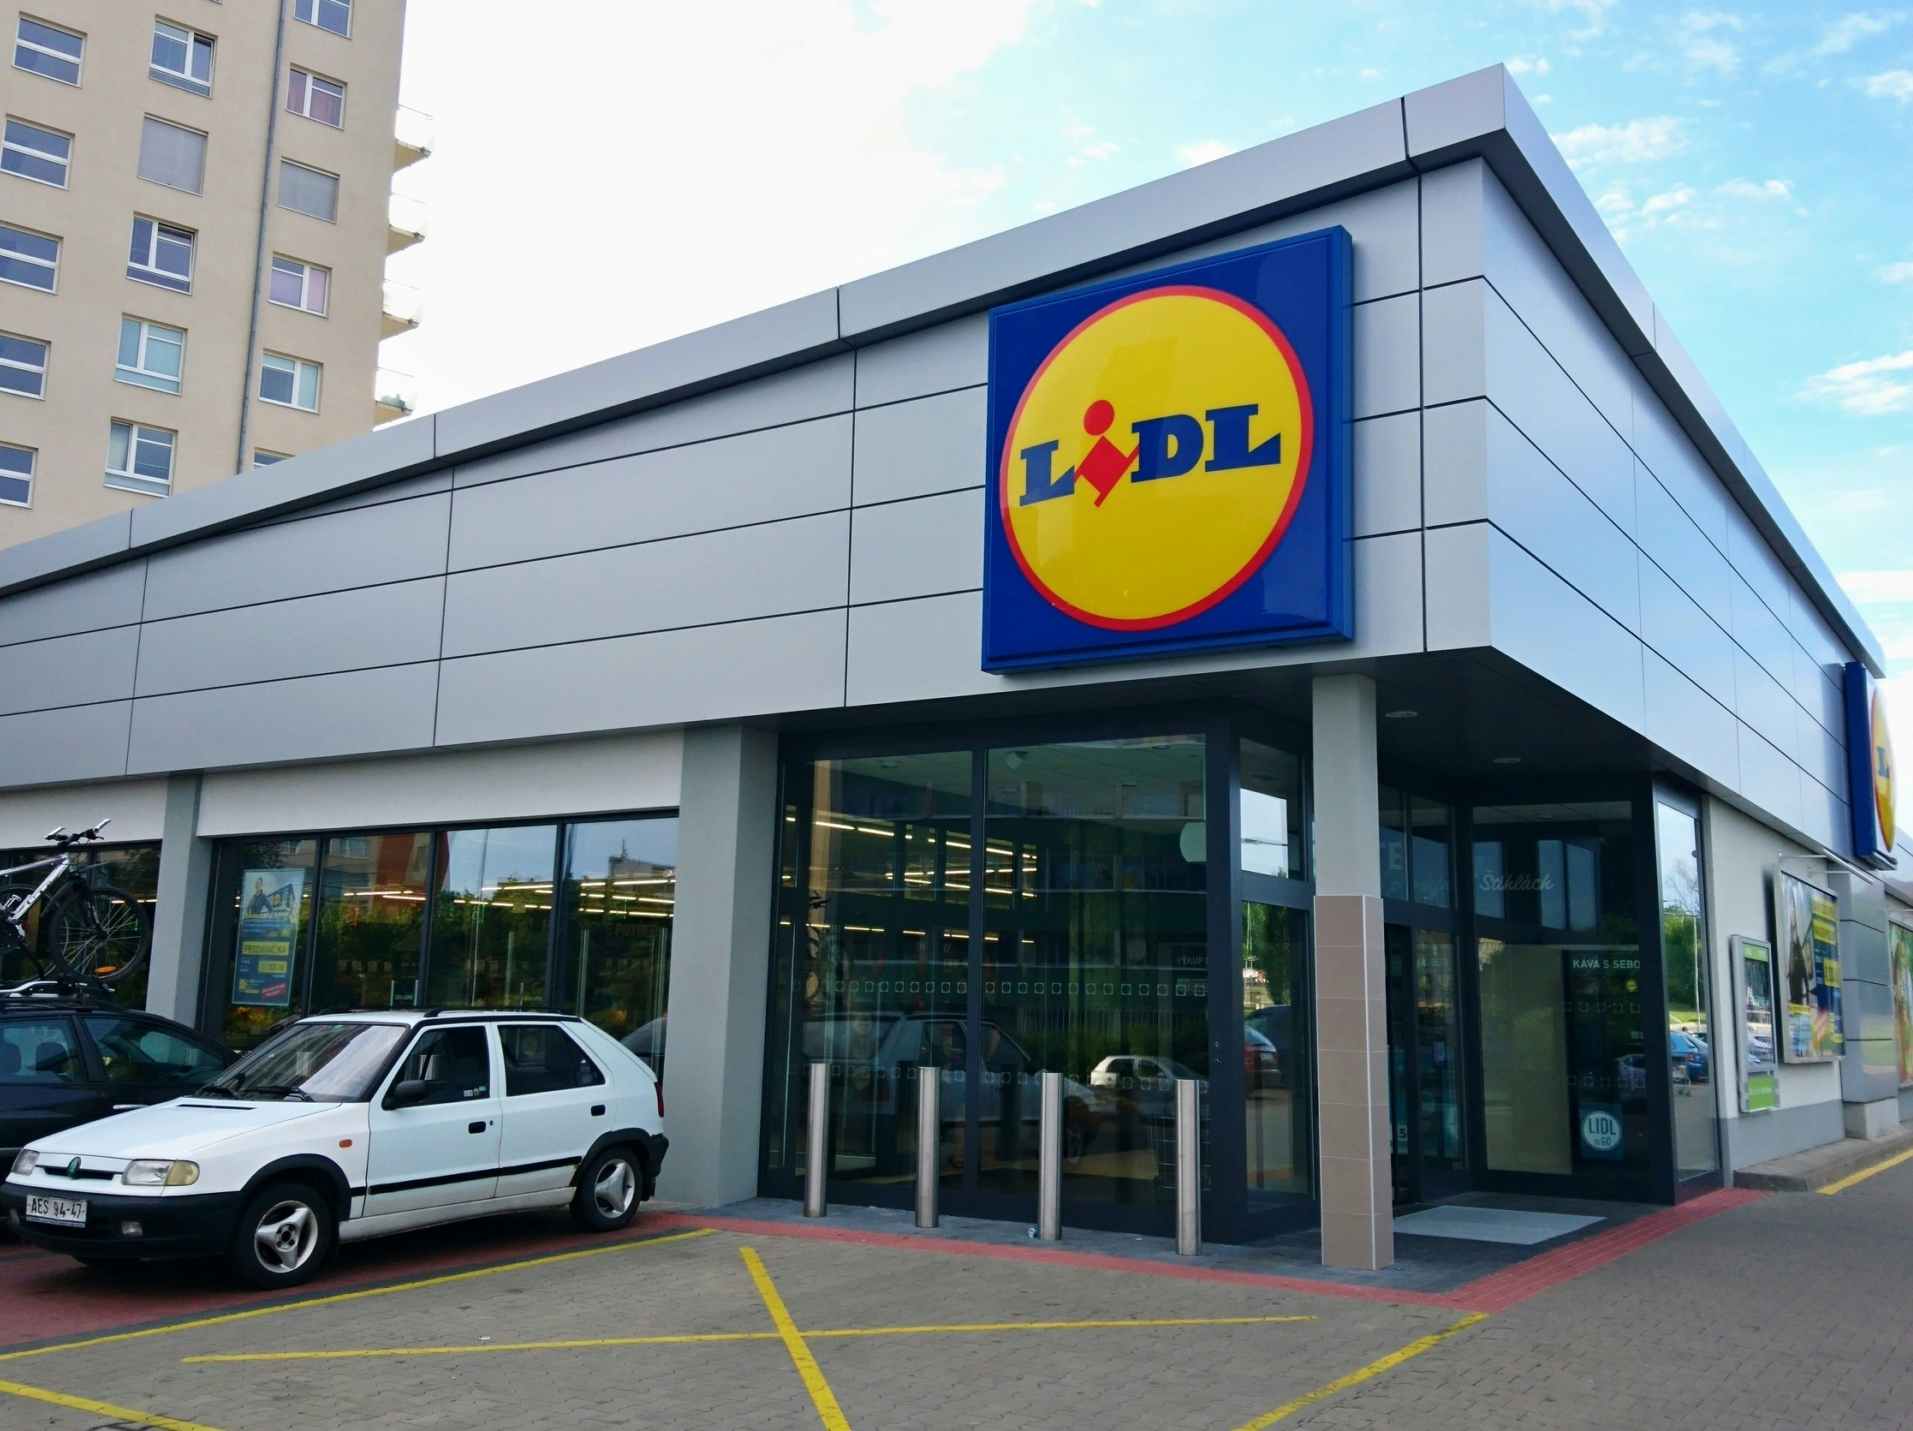 The outside of a Lidl store